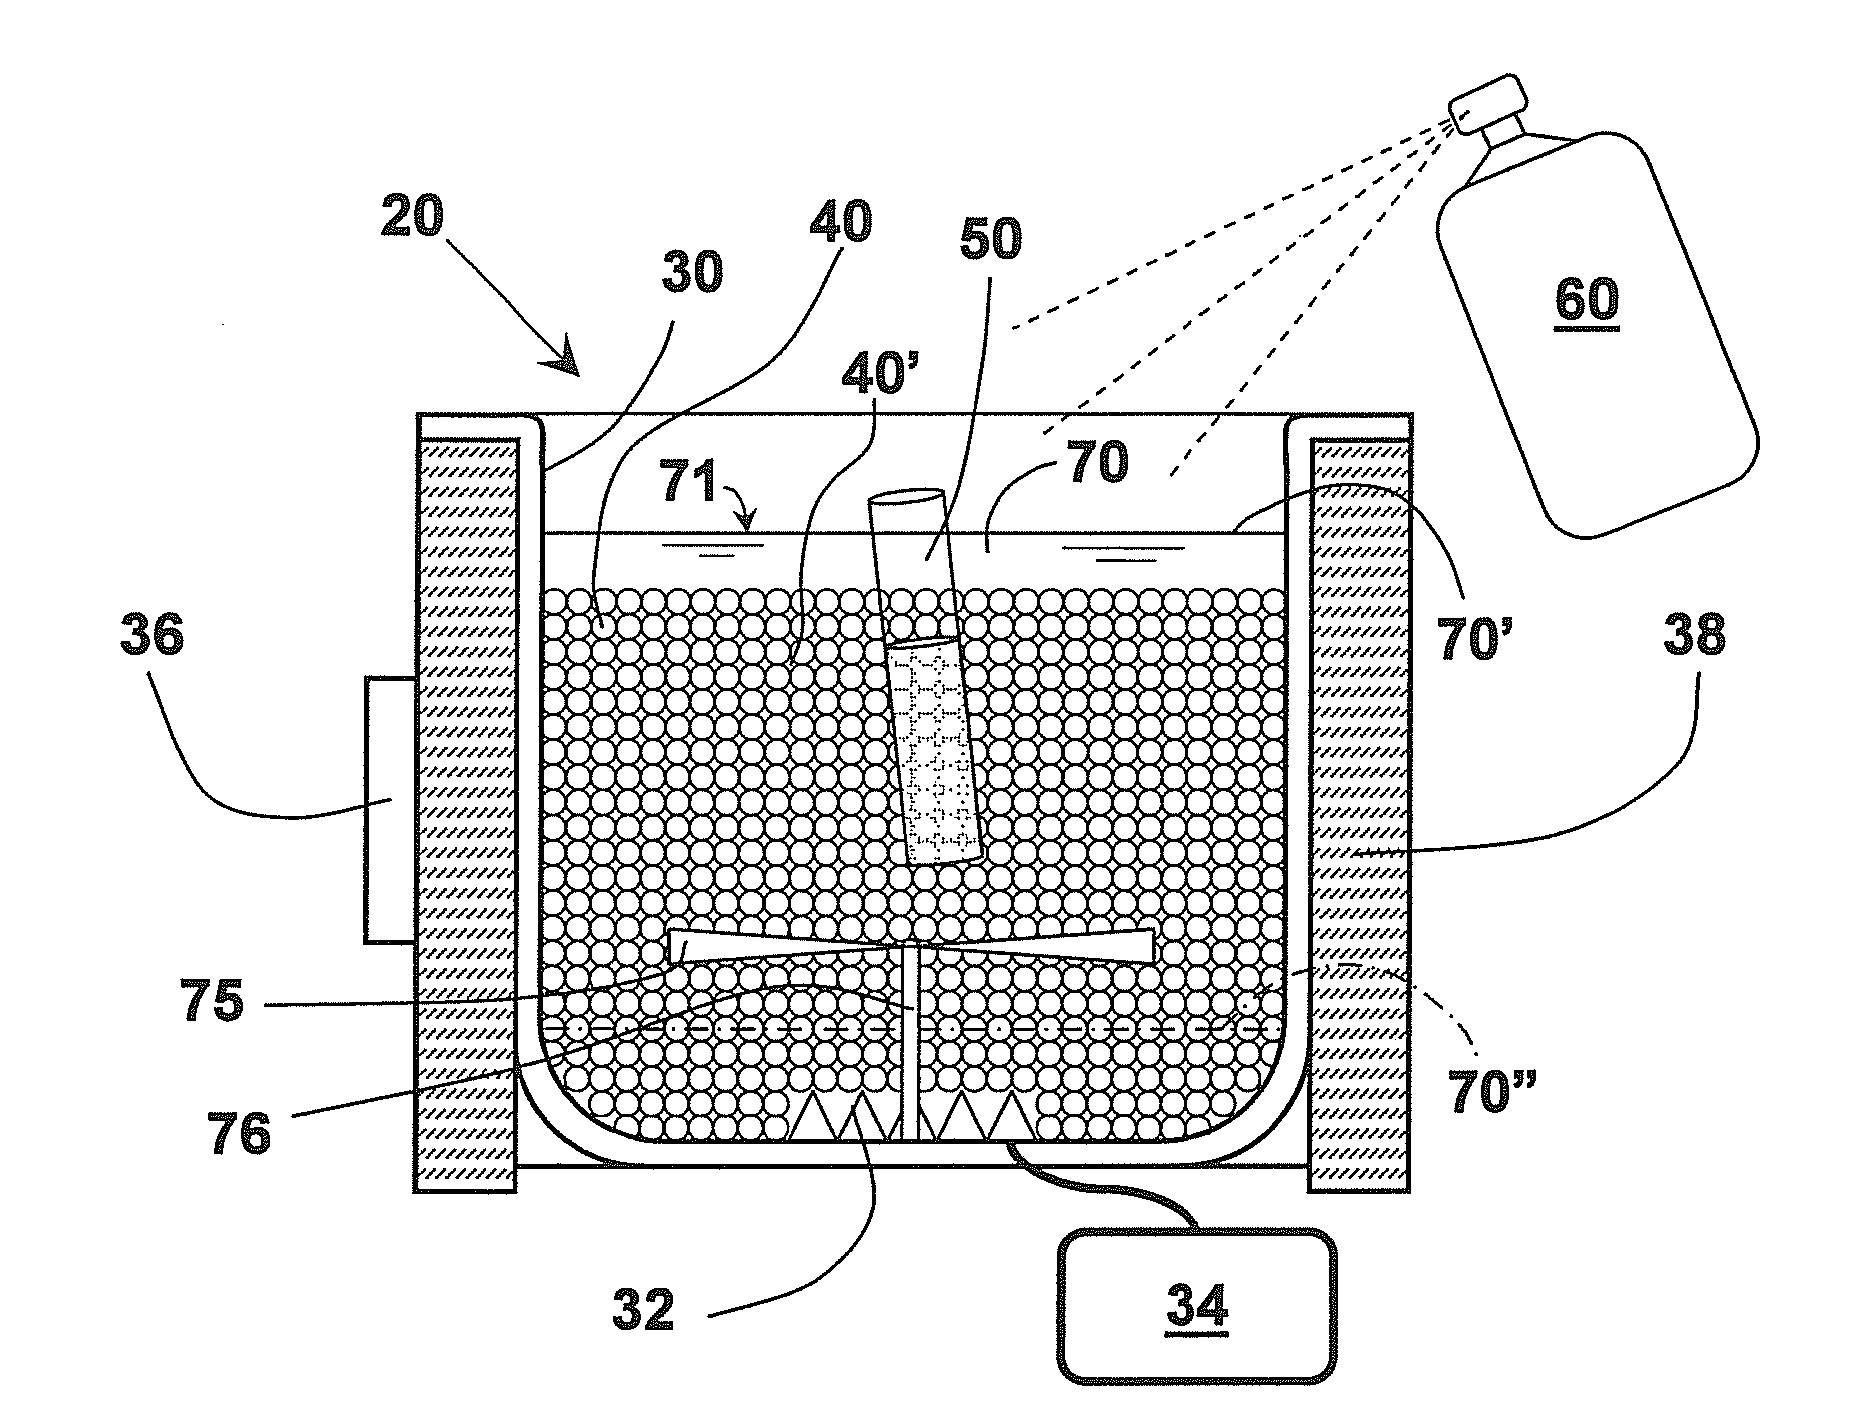 Thermal Bath Systems and Thermally-Conductive Particulate Thermal Bath Media and Methods